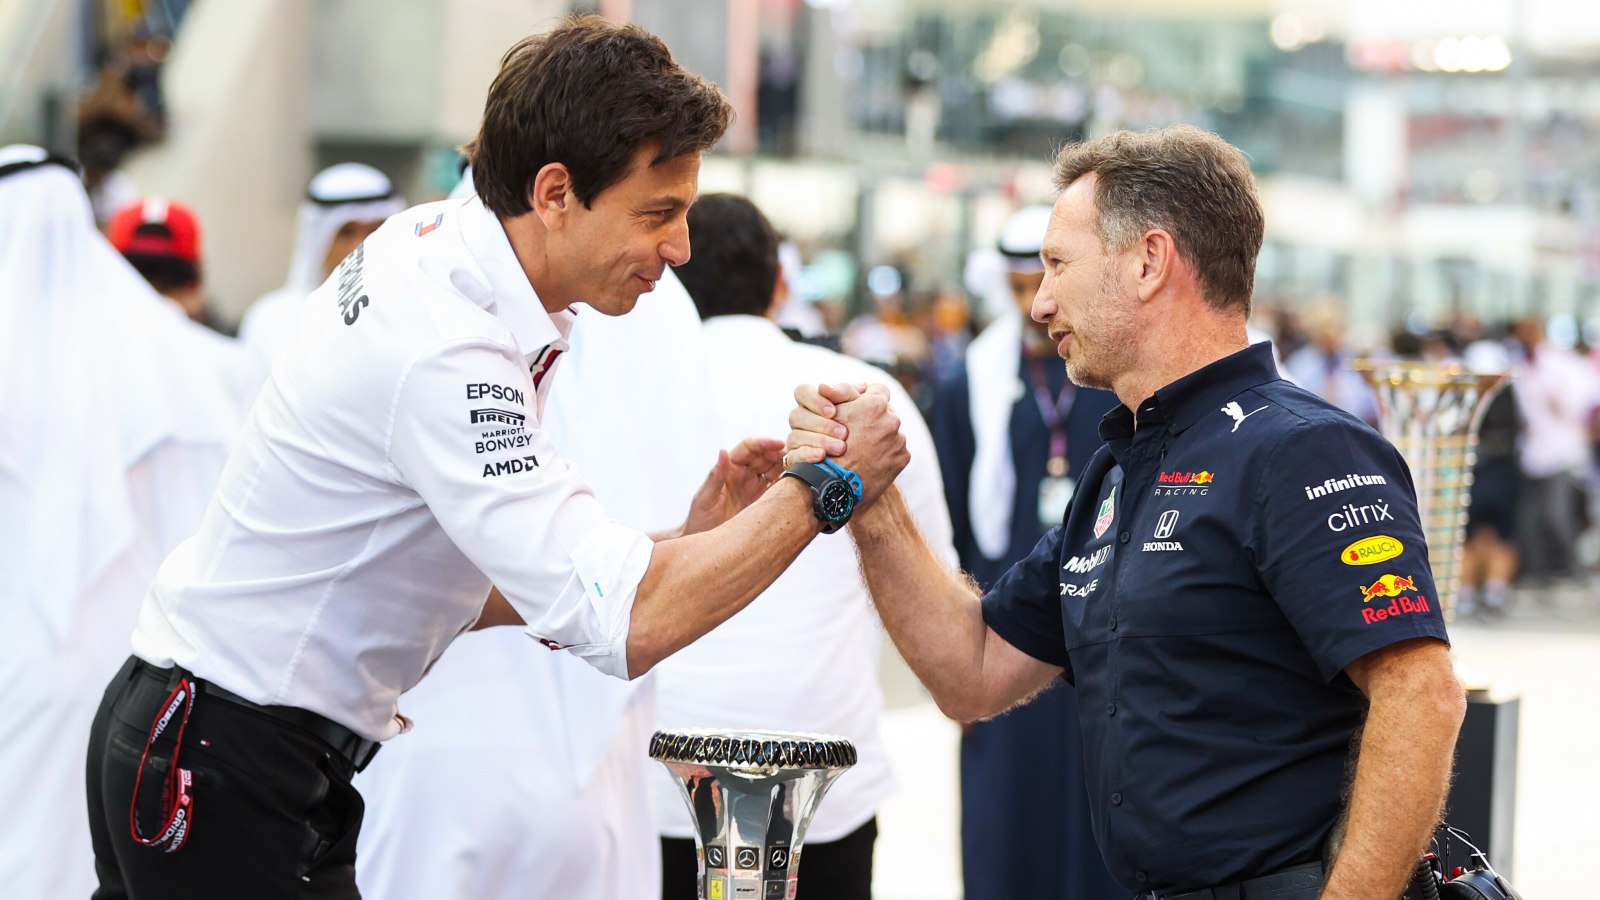 Toto Wolff and Christian Horner shake hands. Abu Dhabi, December 2021.